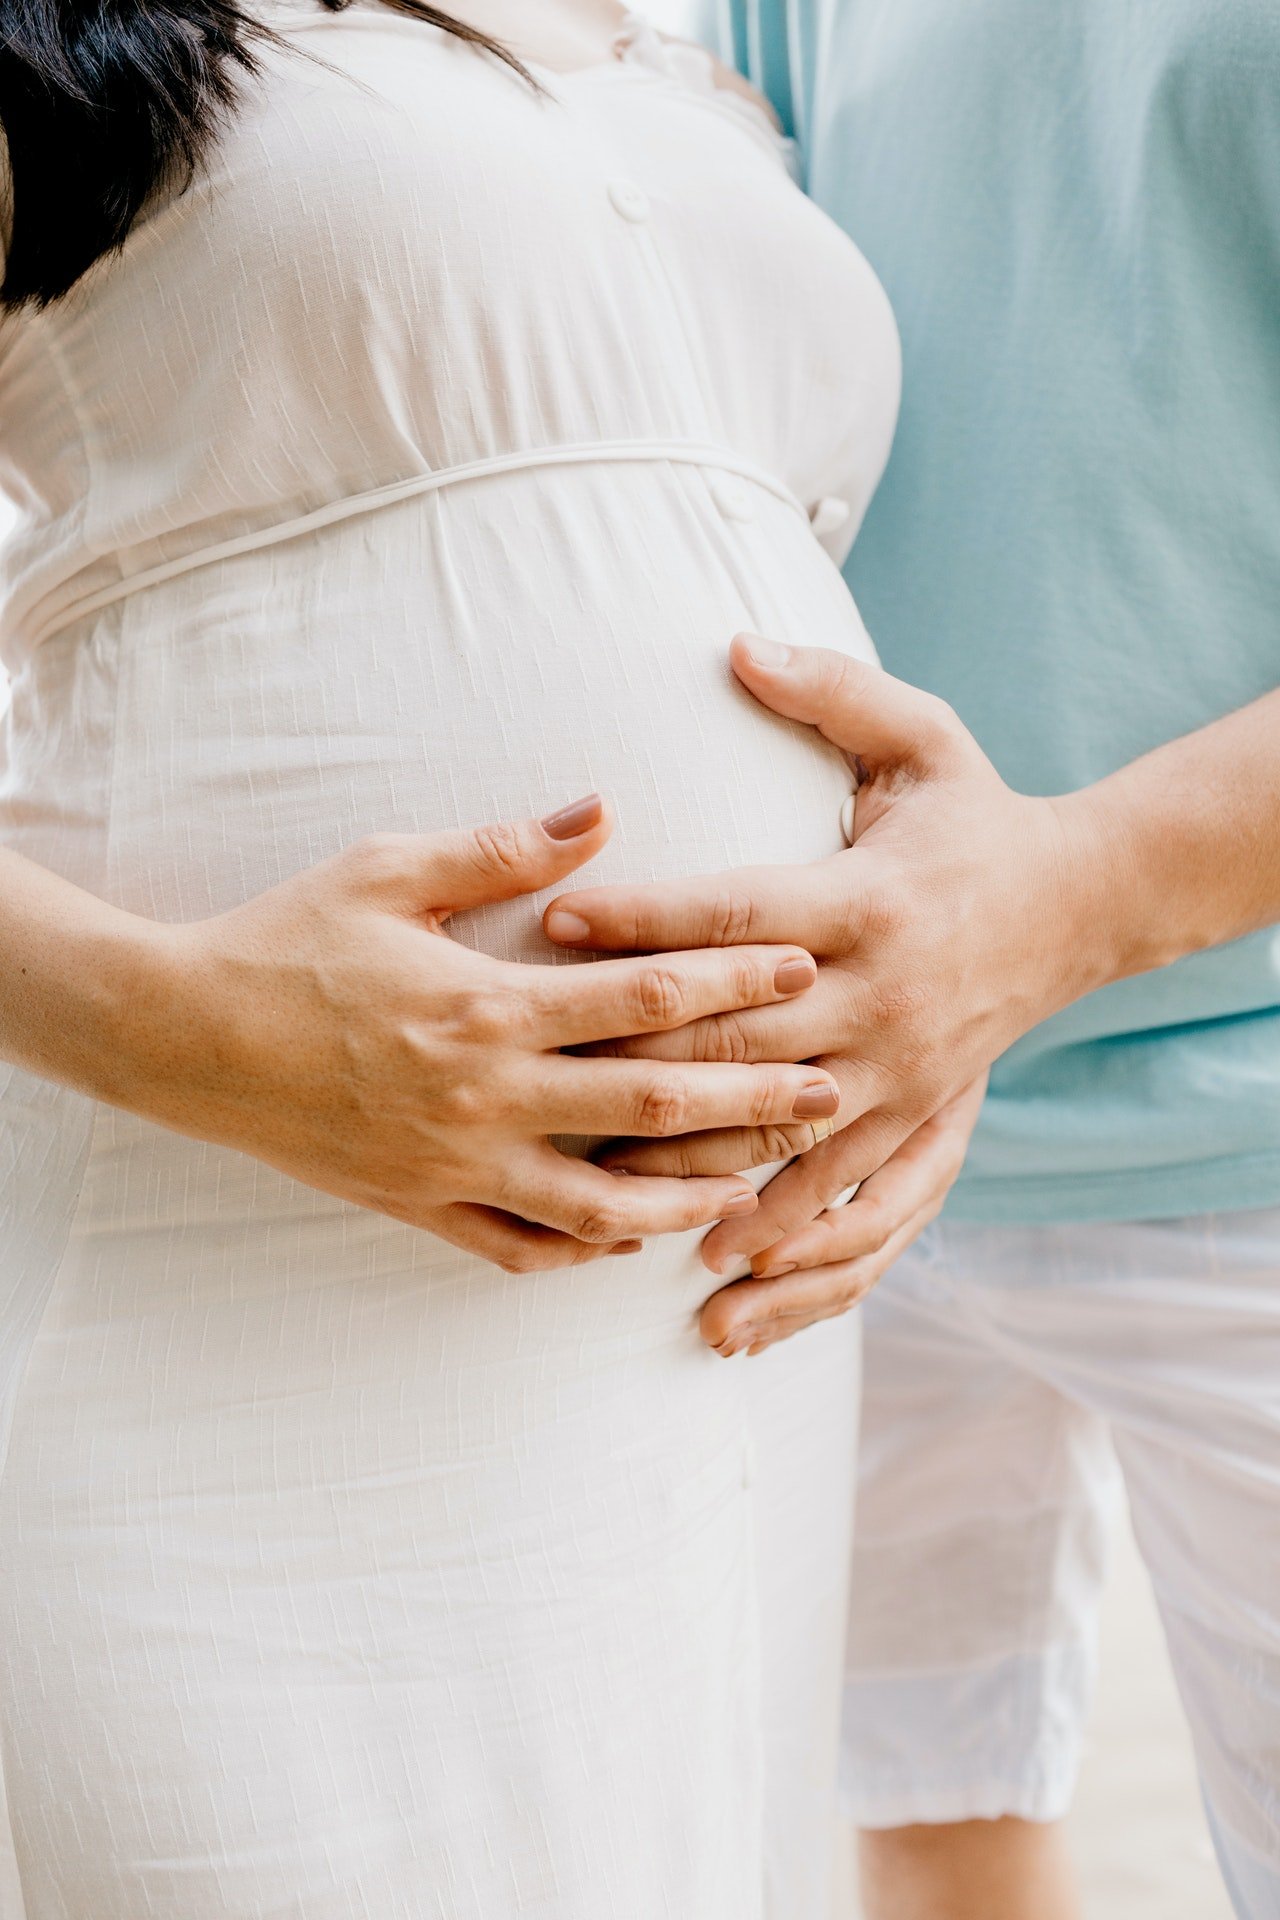 Man touching pregnant woman's belly | Source: Pexels